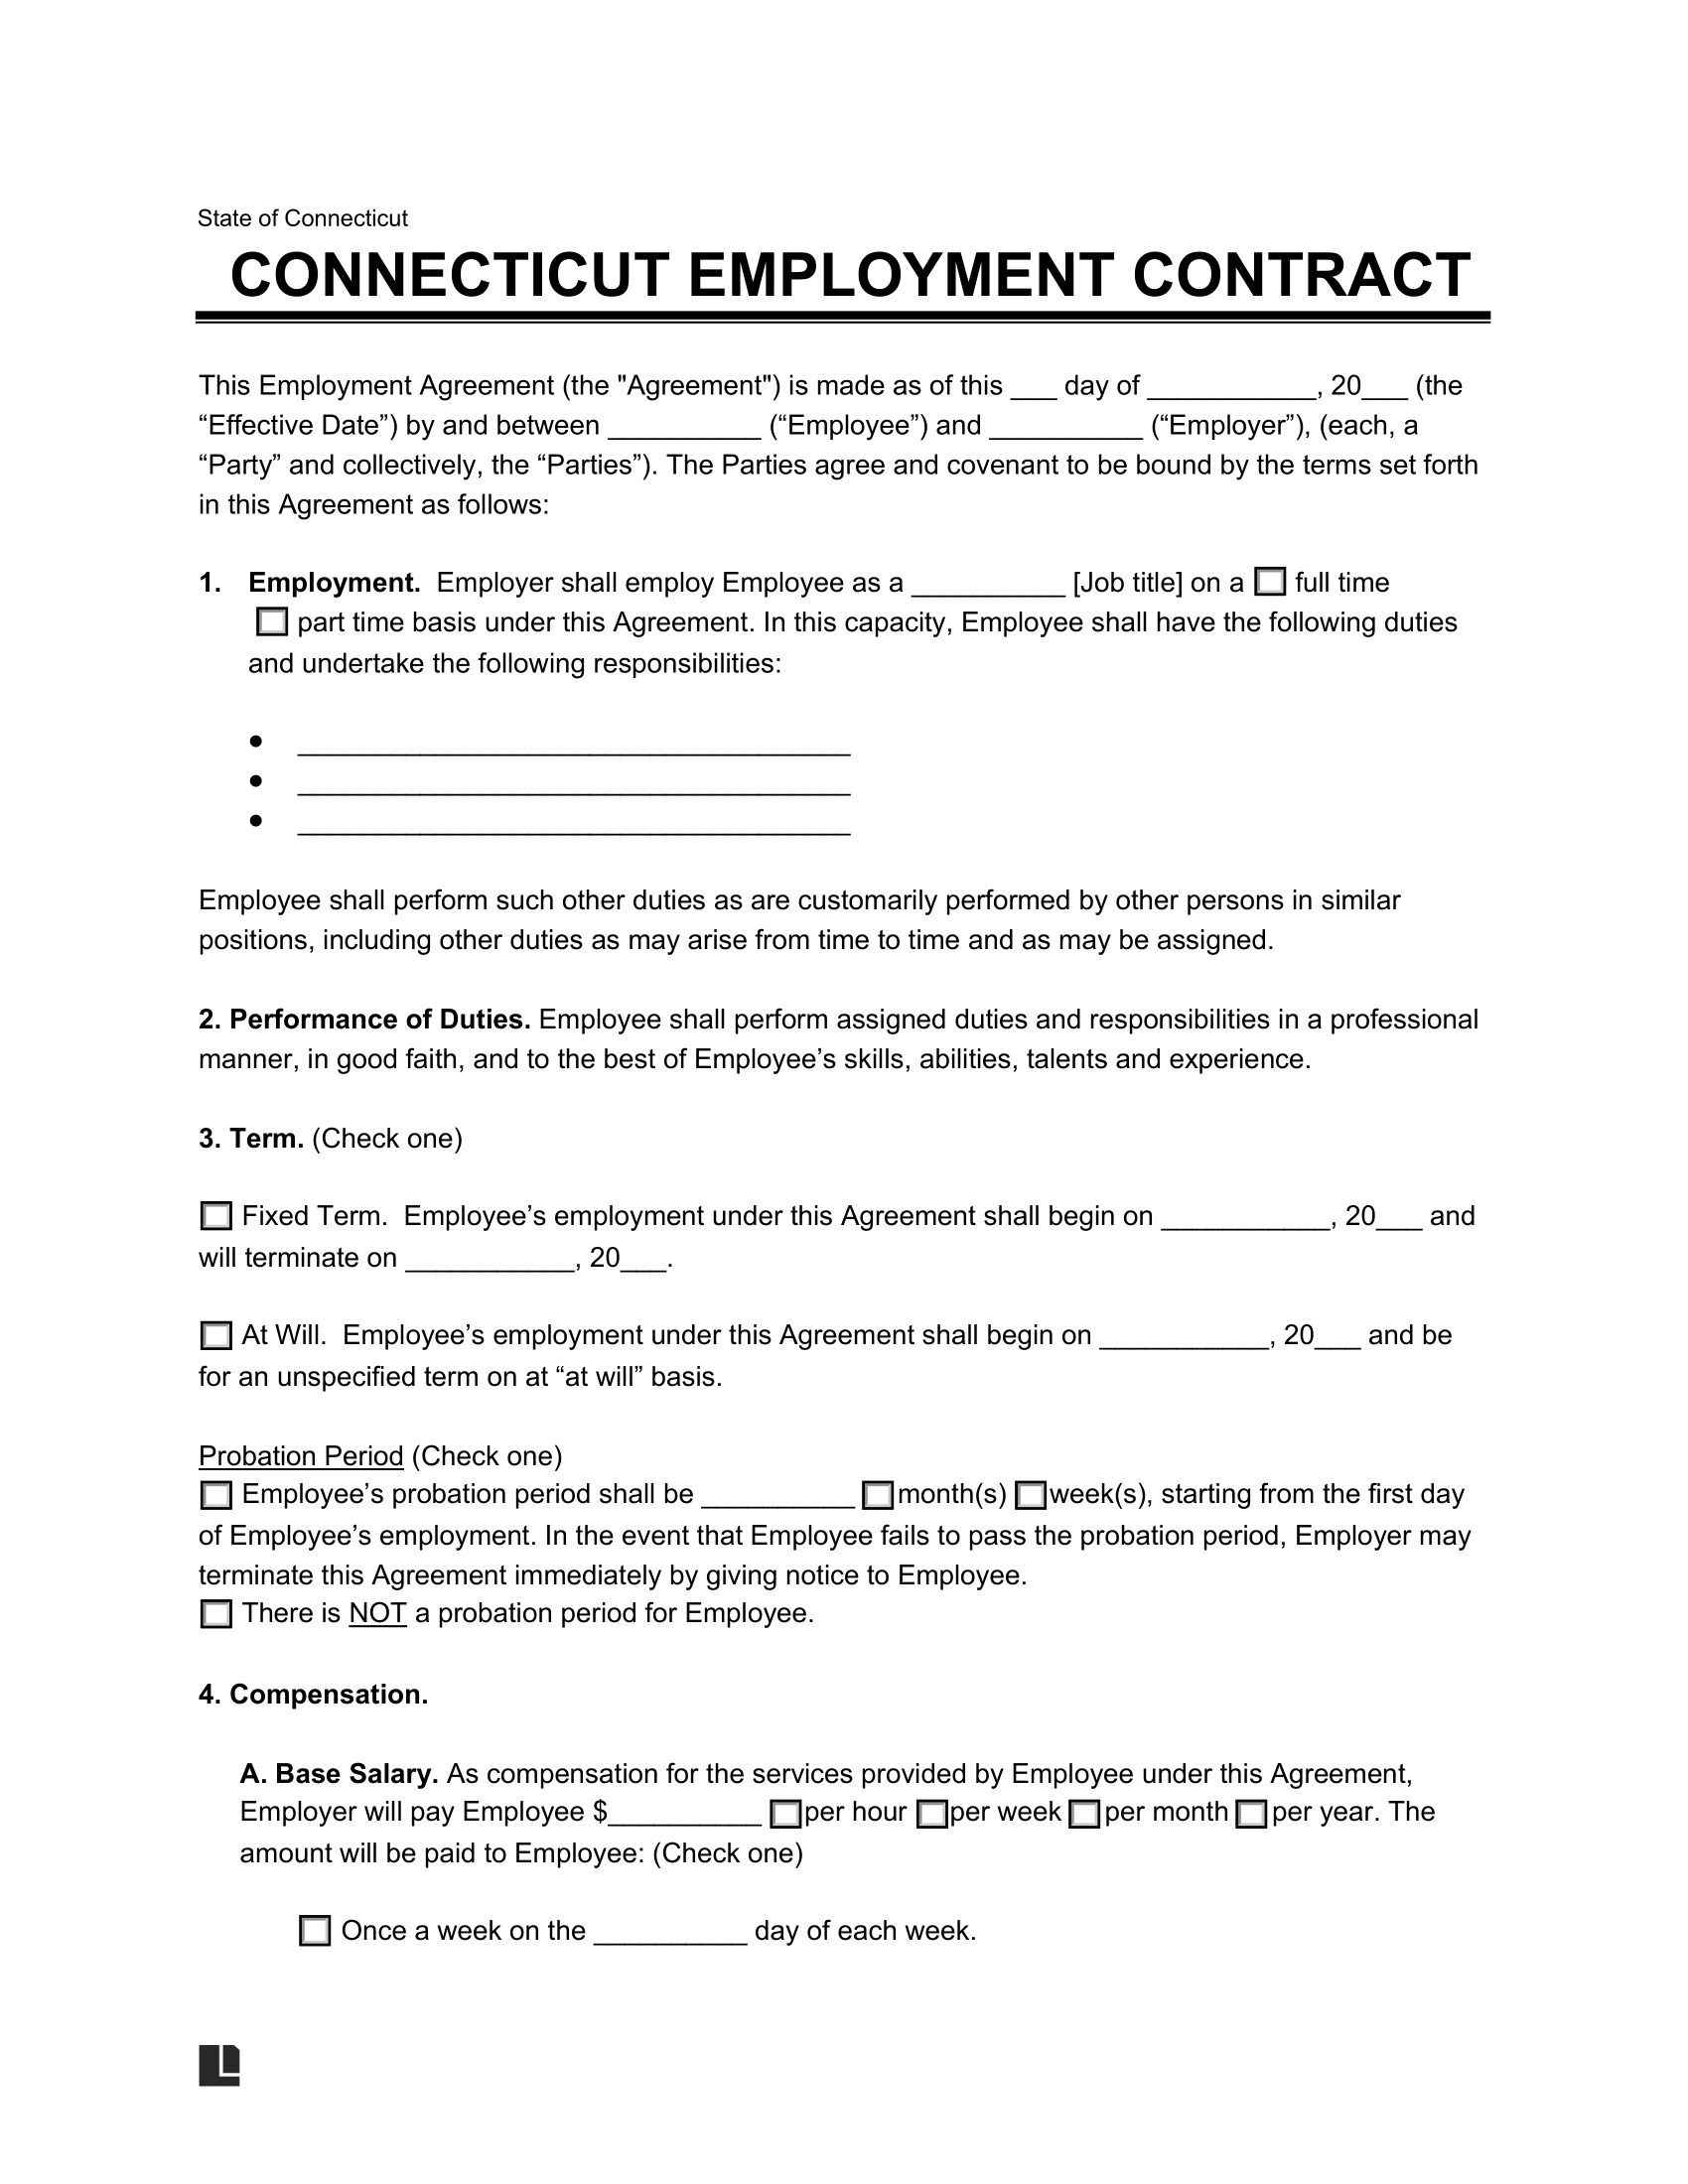 connecticut employment contract template